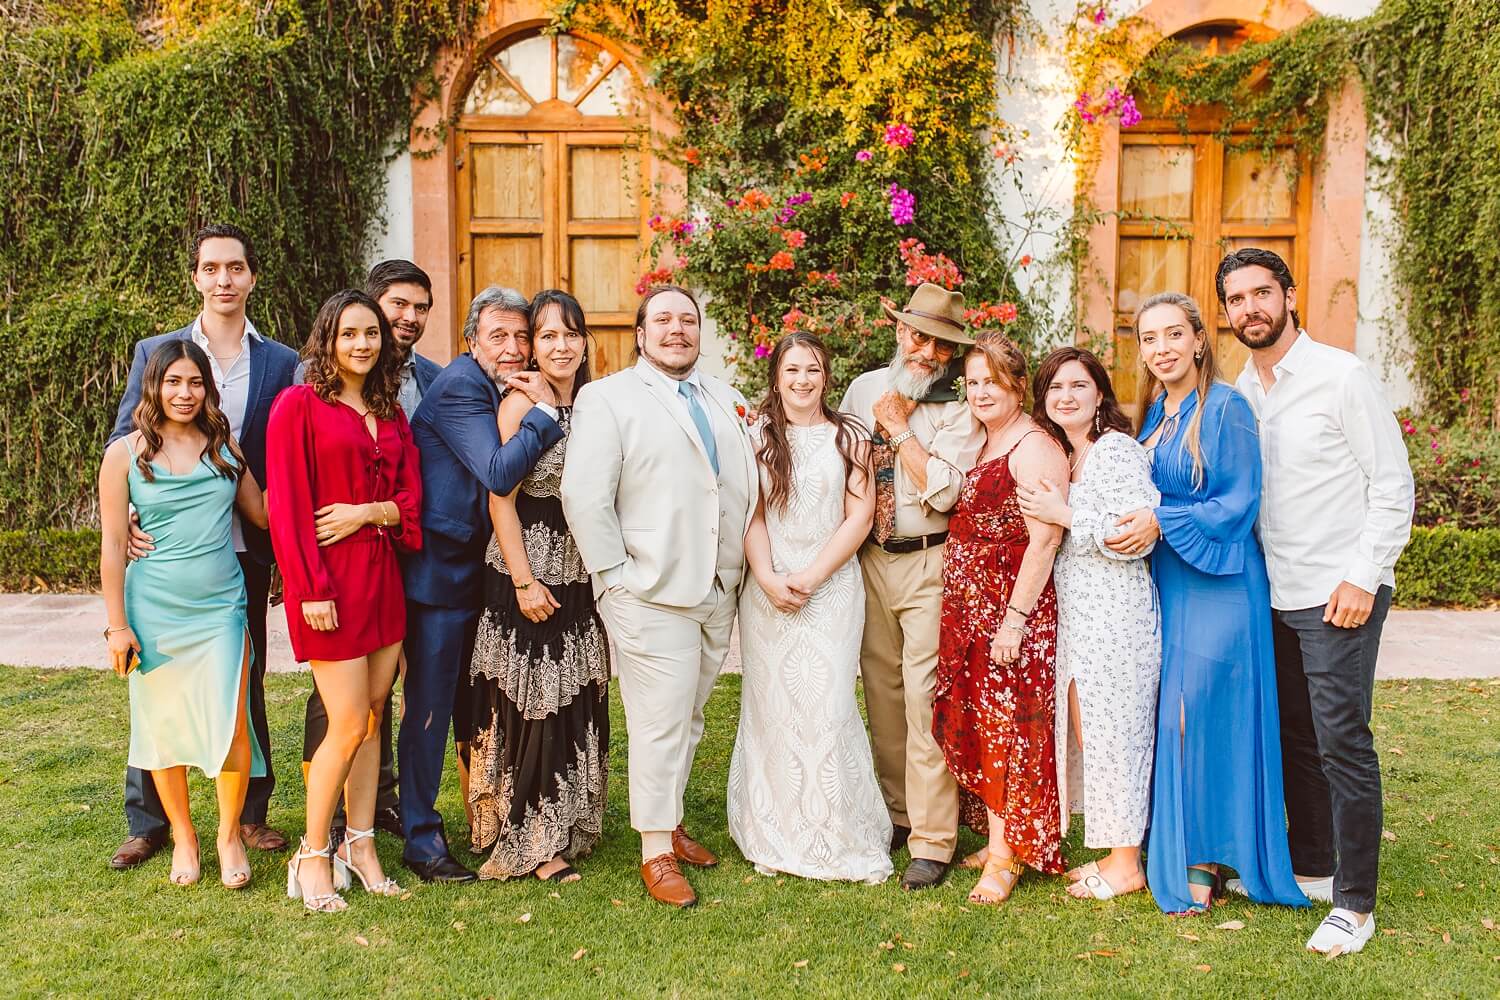 Bride and groom with family during Mexico destination wedding reception | Brooke Michelle Photo